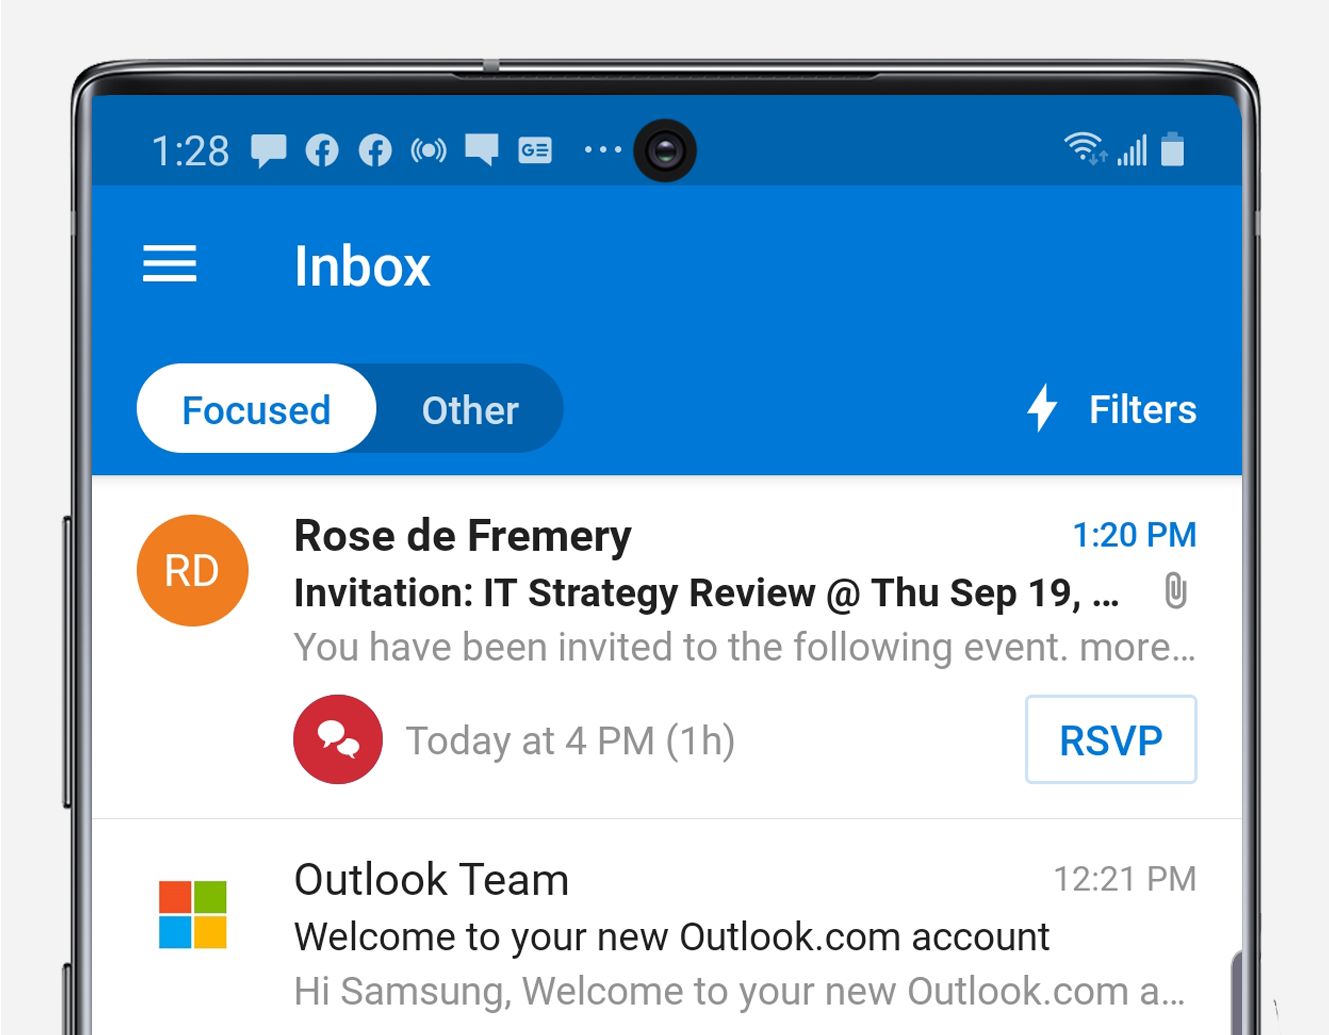 How To Select All Messages On Outlook.com